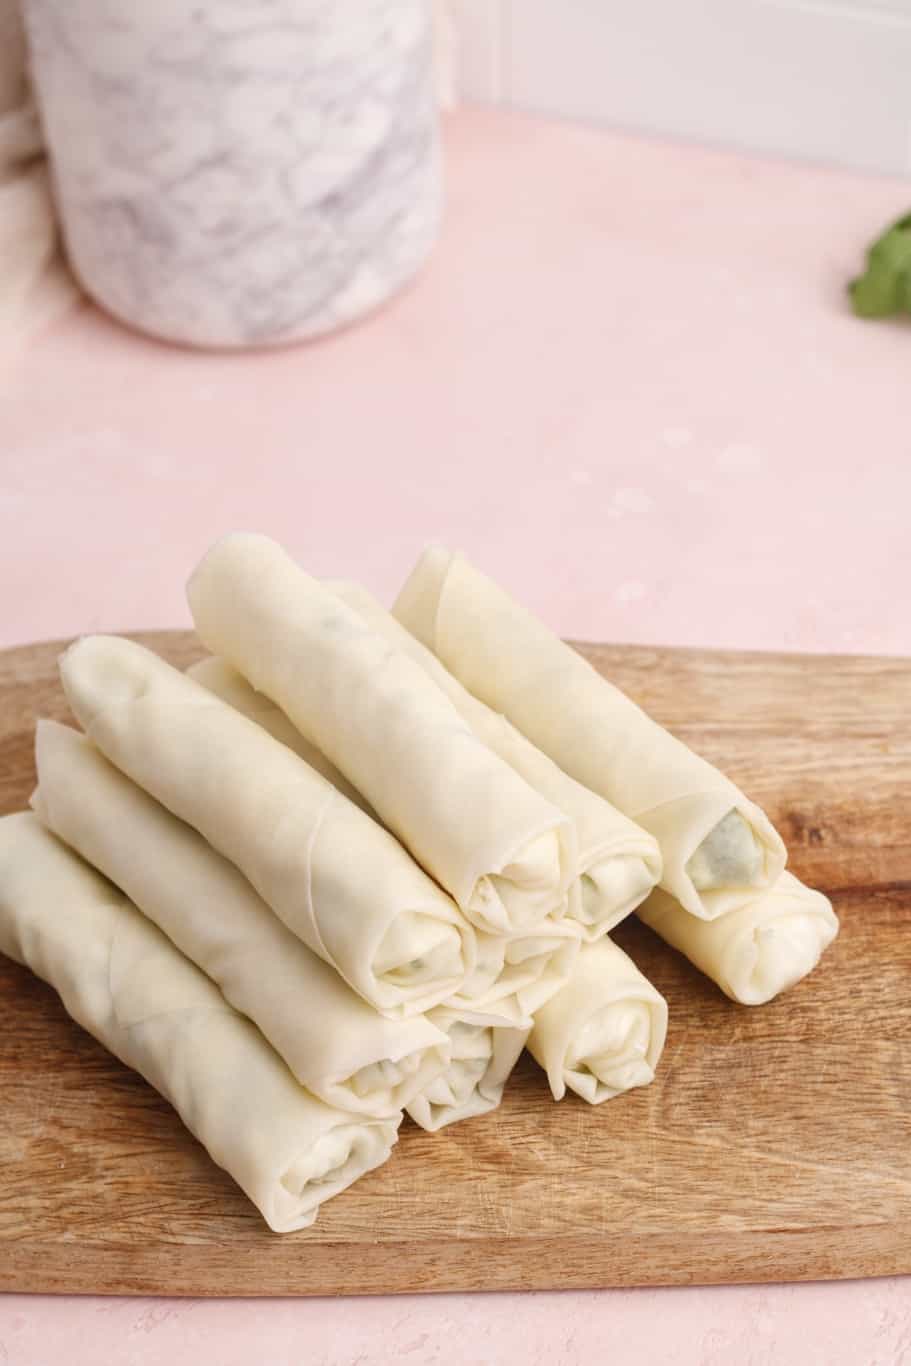 10 Turkish cheese rolls stuffed with cheese and herbs and wrapped like a cigarette